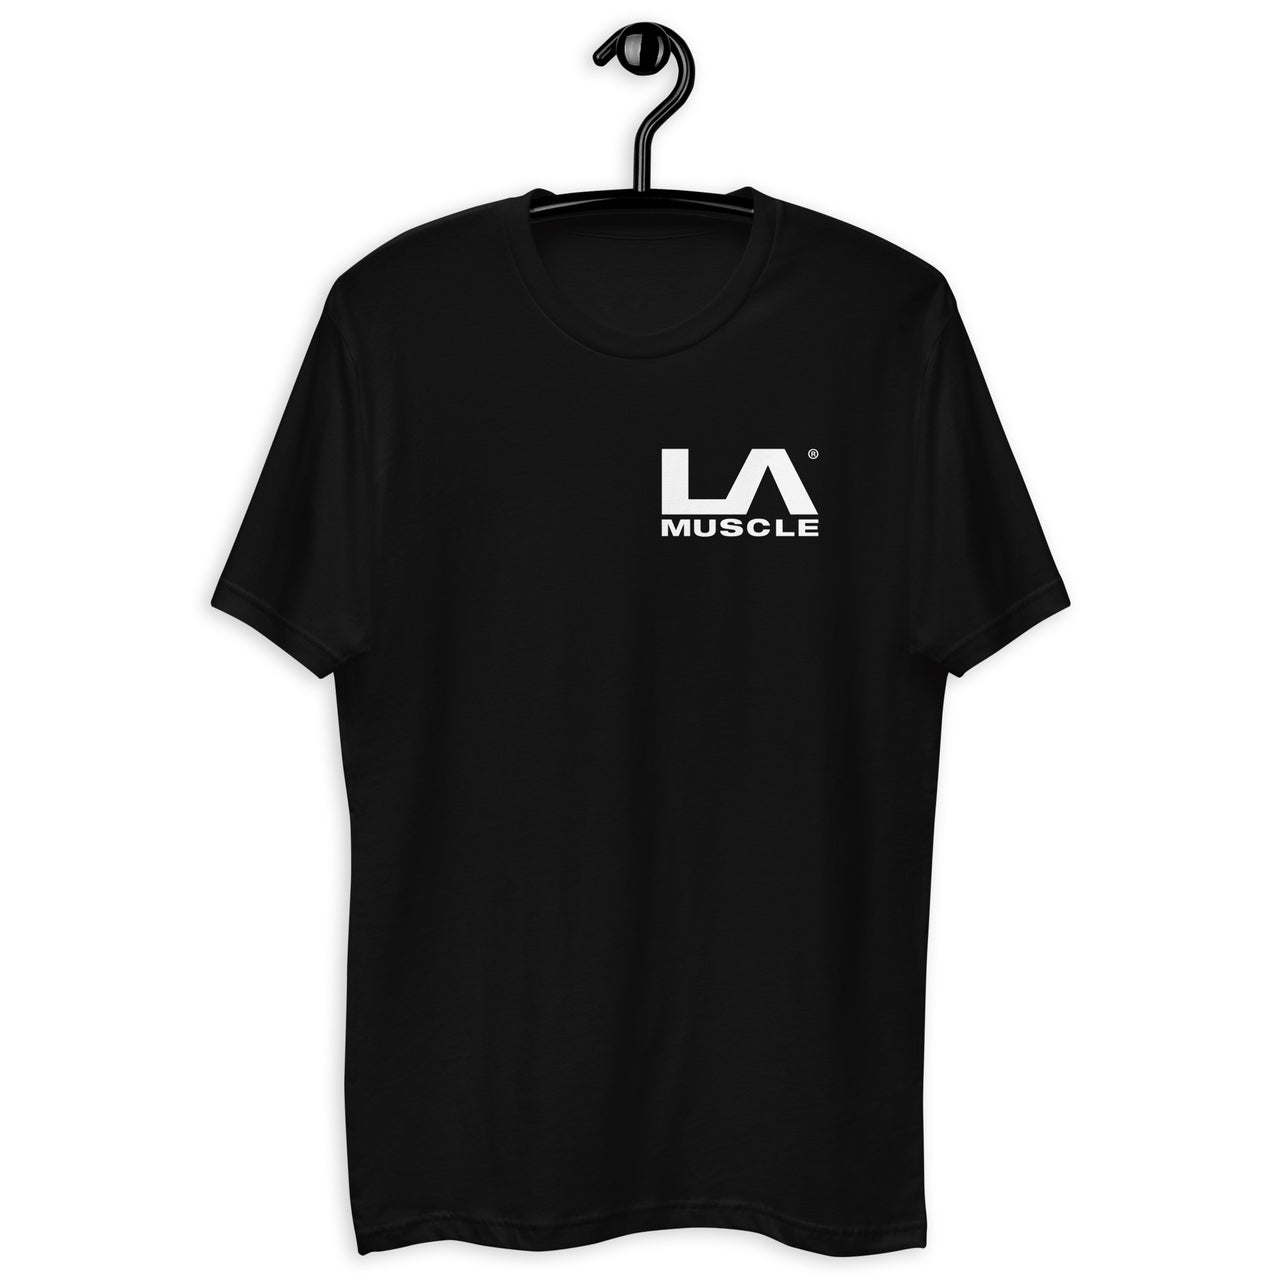 LA Muscle White Logo FITTED Short Sleeve T-shirt